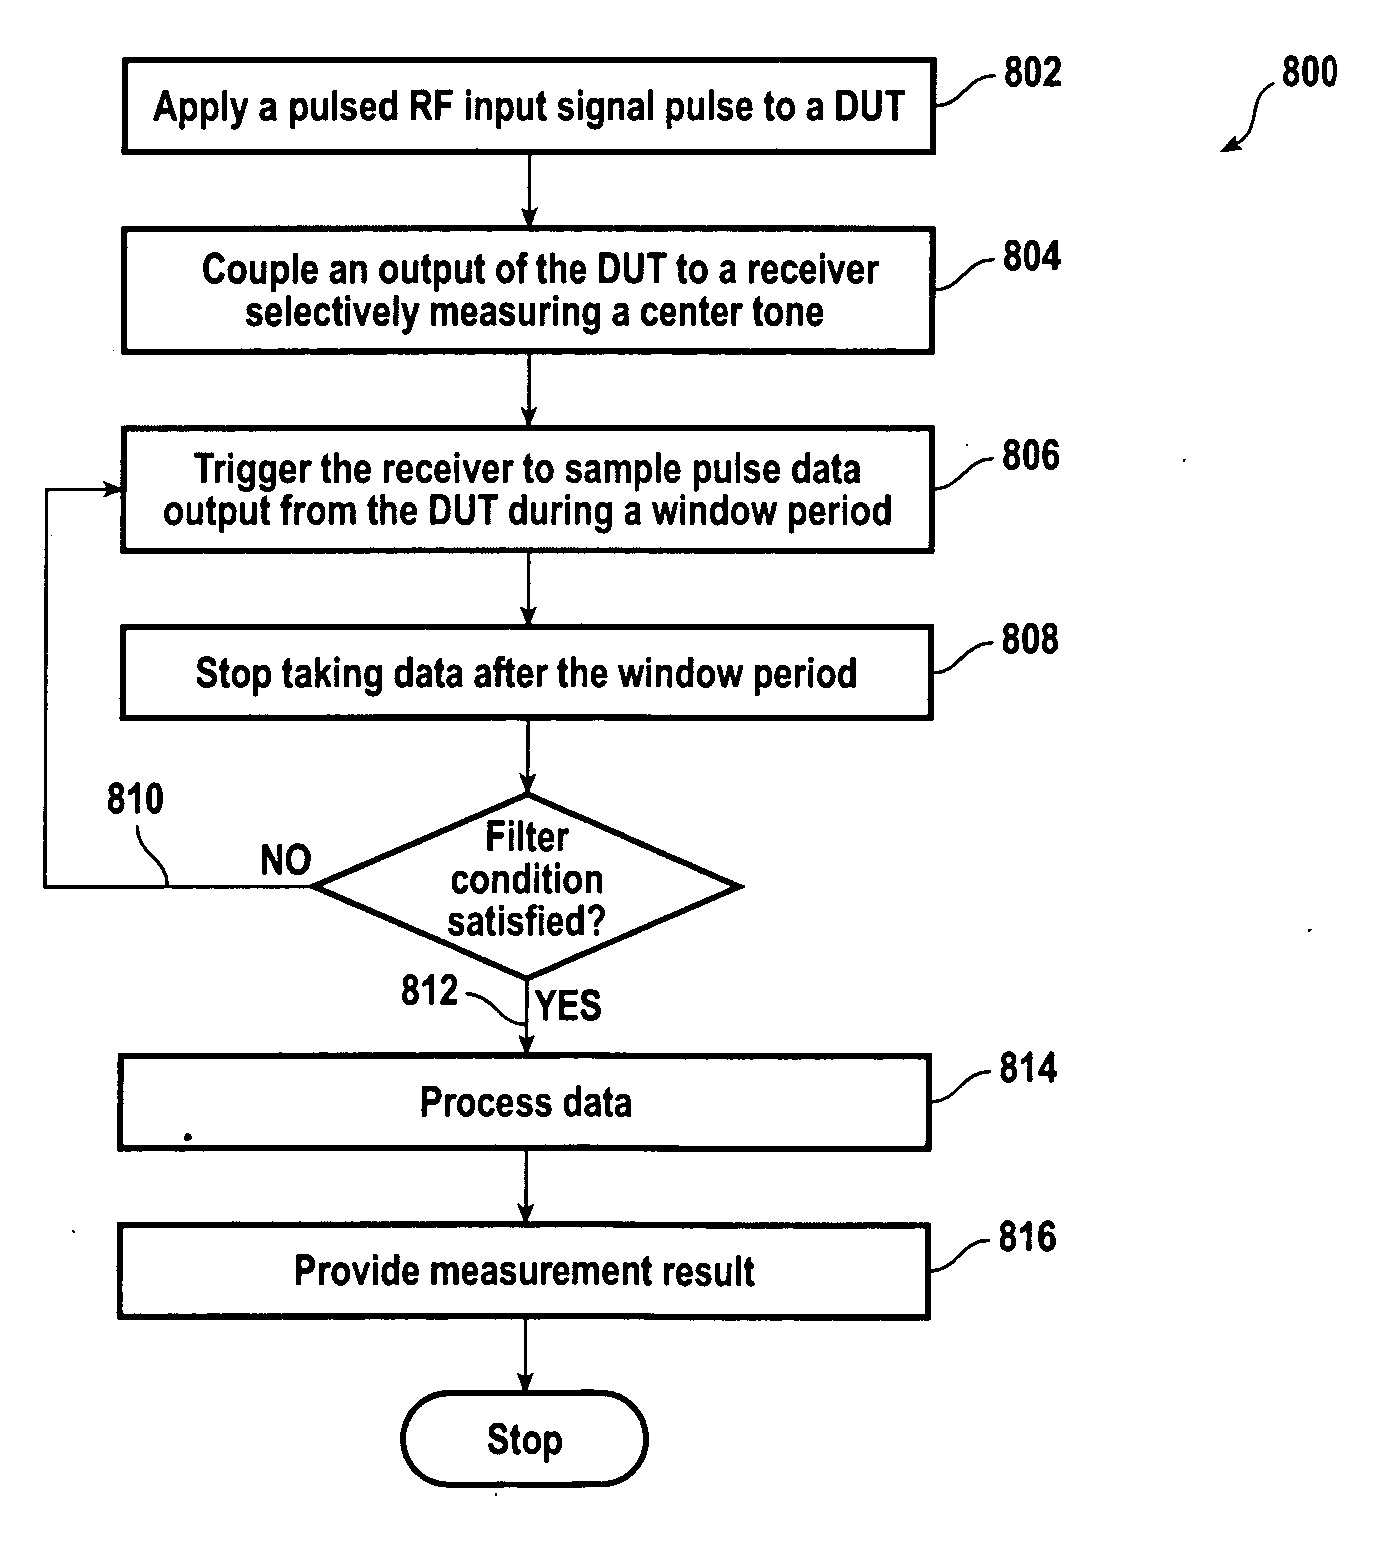 Triggered narrow-band method for making pulsed-rf networking measurements